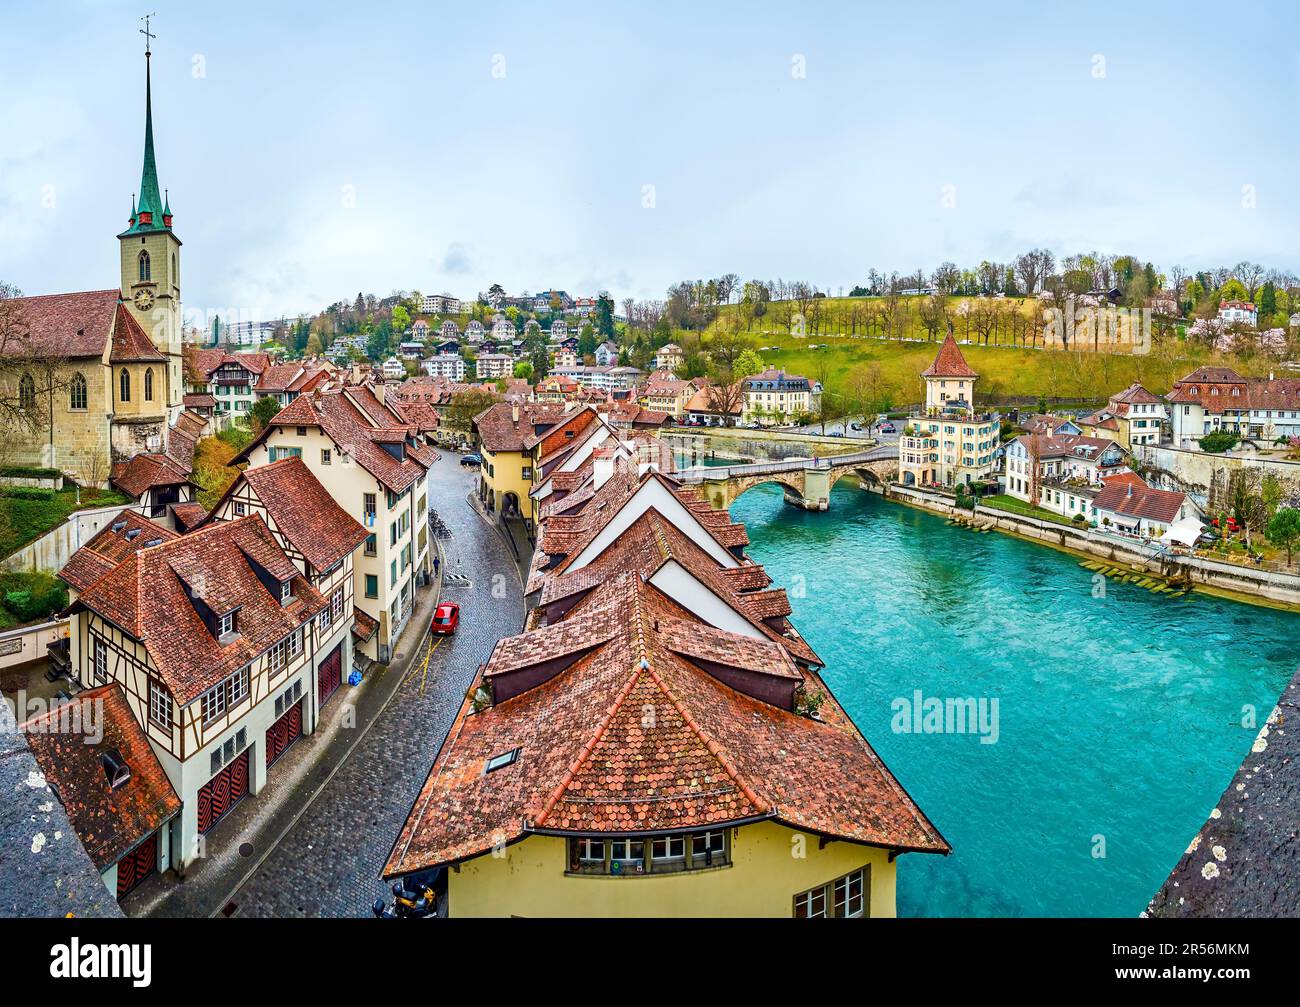 The cityscape of the oldest part of Bern with outstanding townhouses, Nydegg church and Untertorbrucke bridge across Aare river, Switzerland Stock Photo